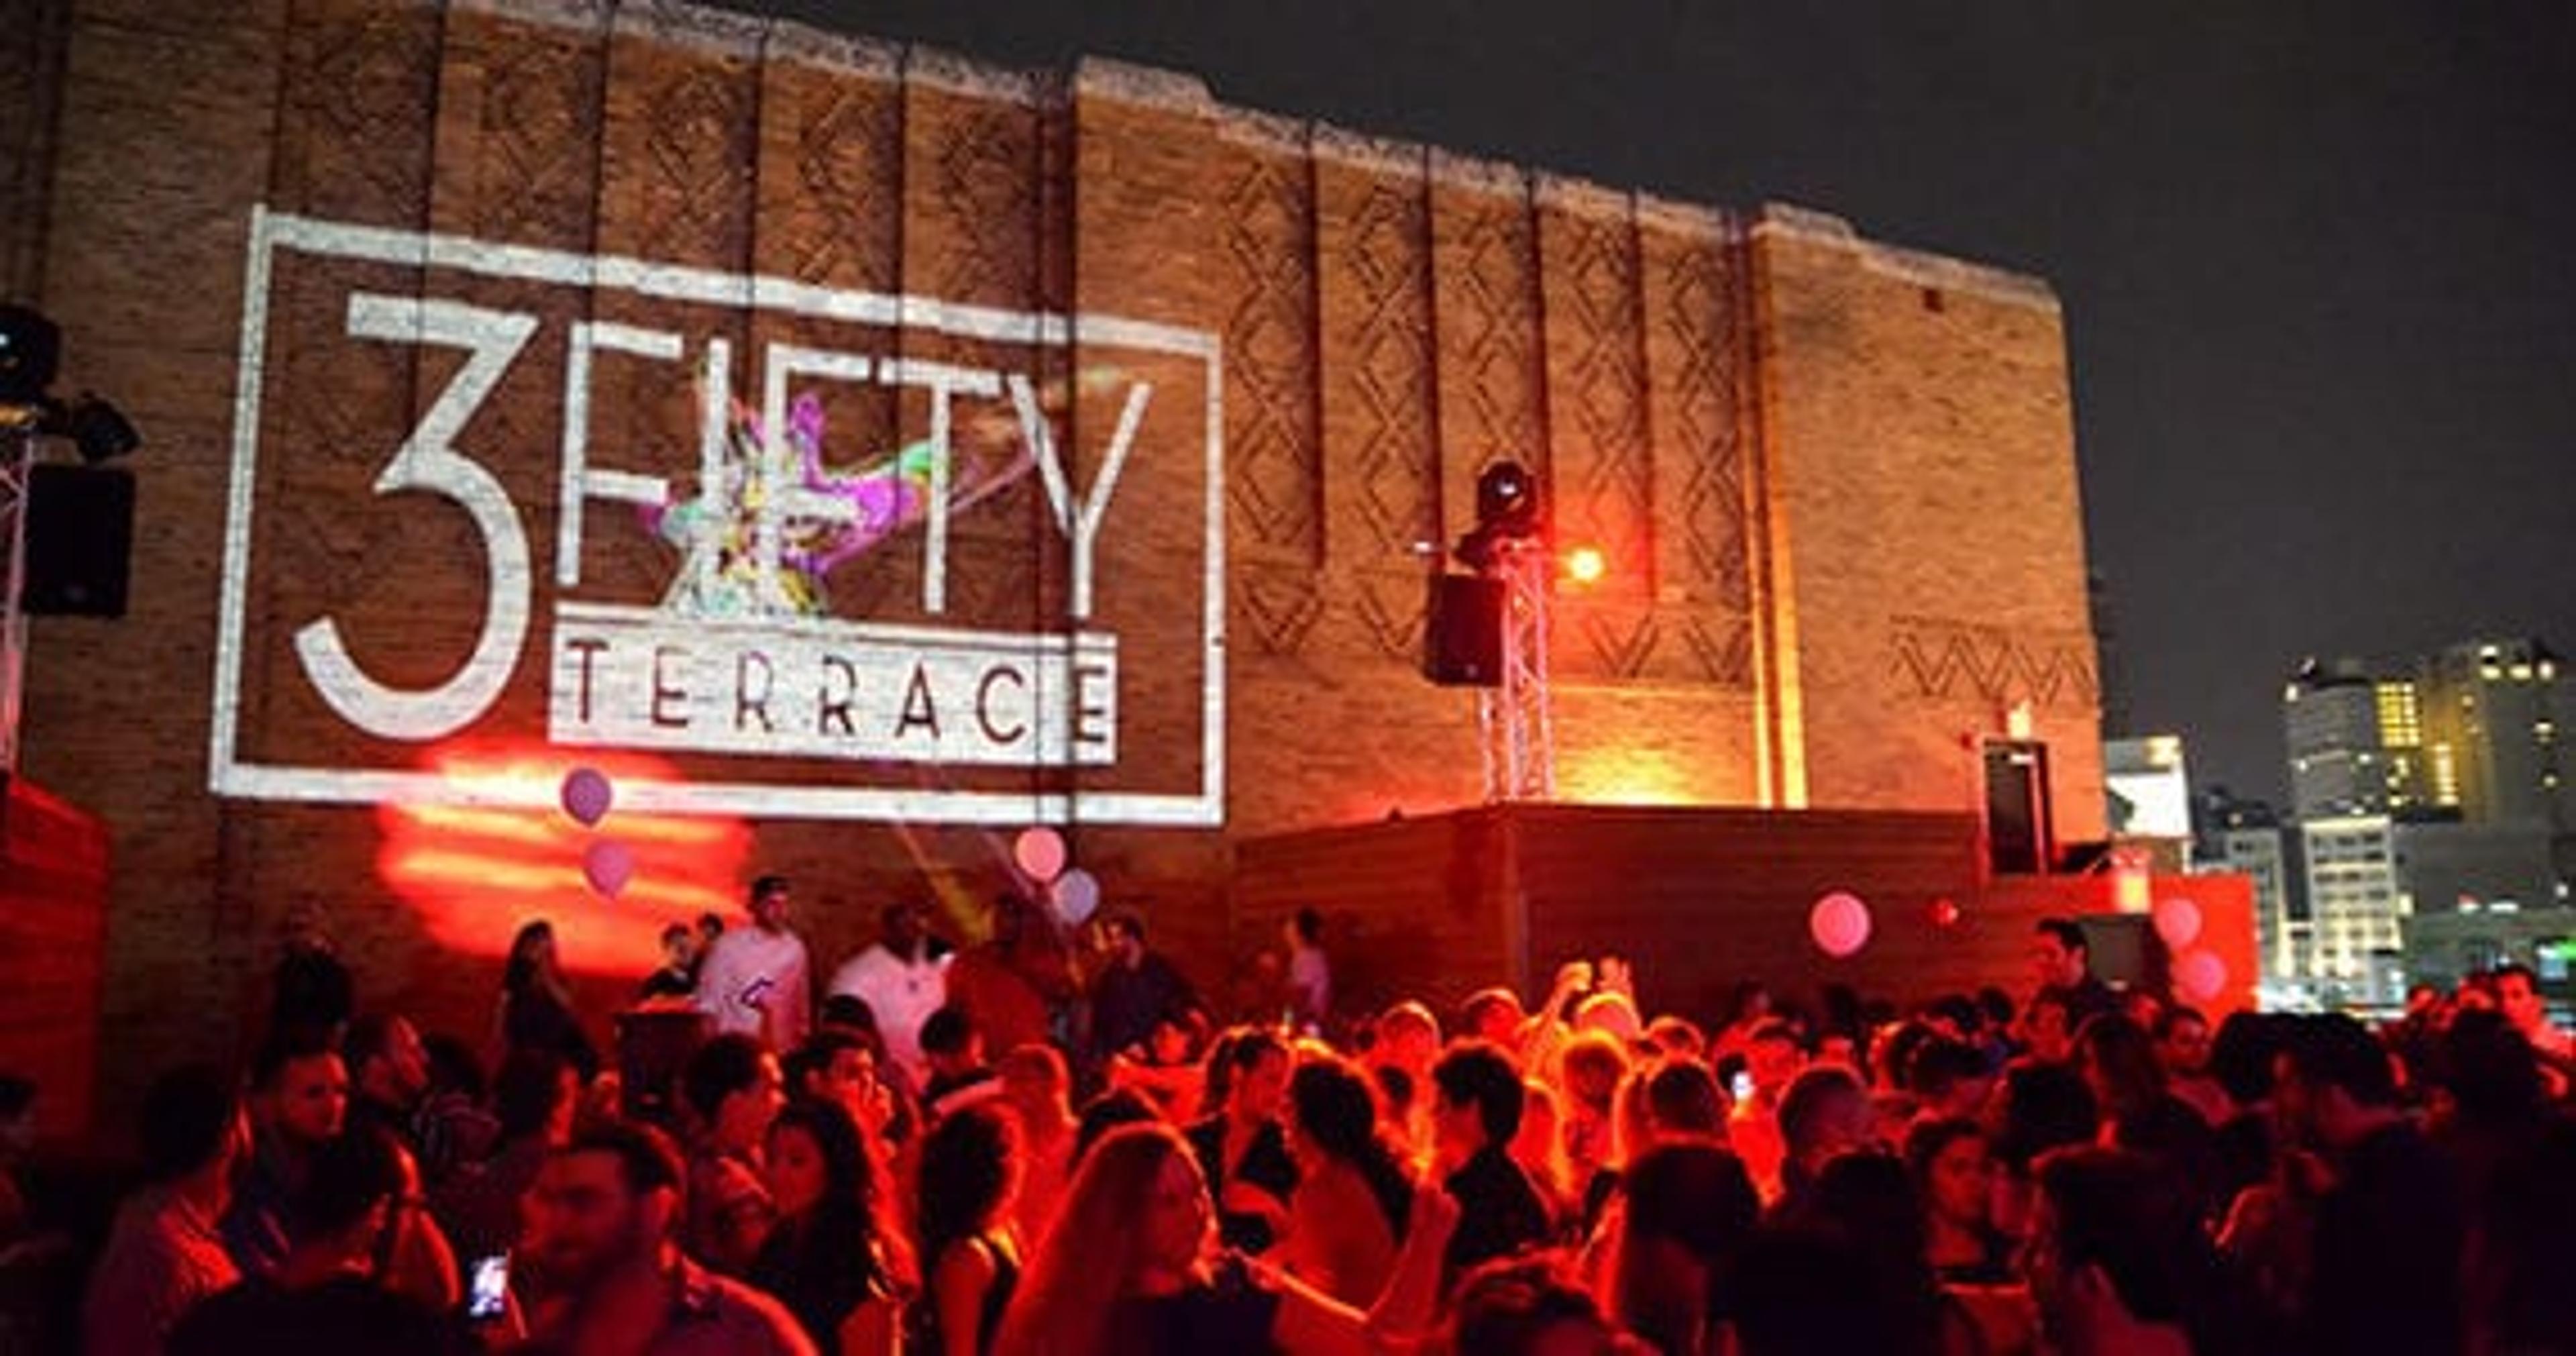 3fifty Terrace - Music Hall Detroit